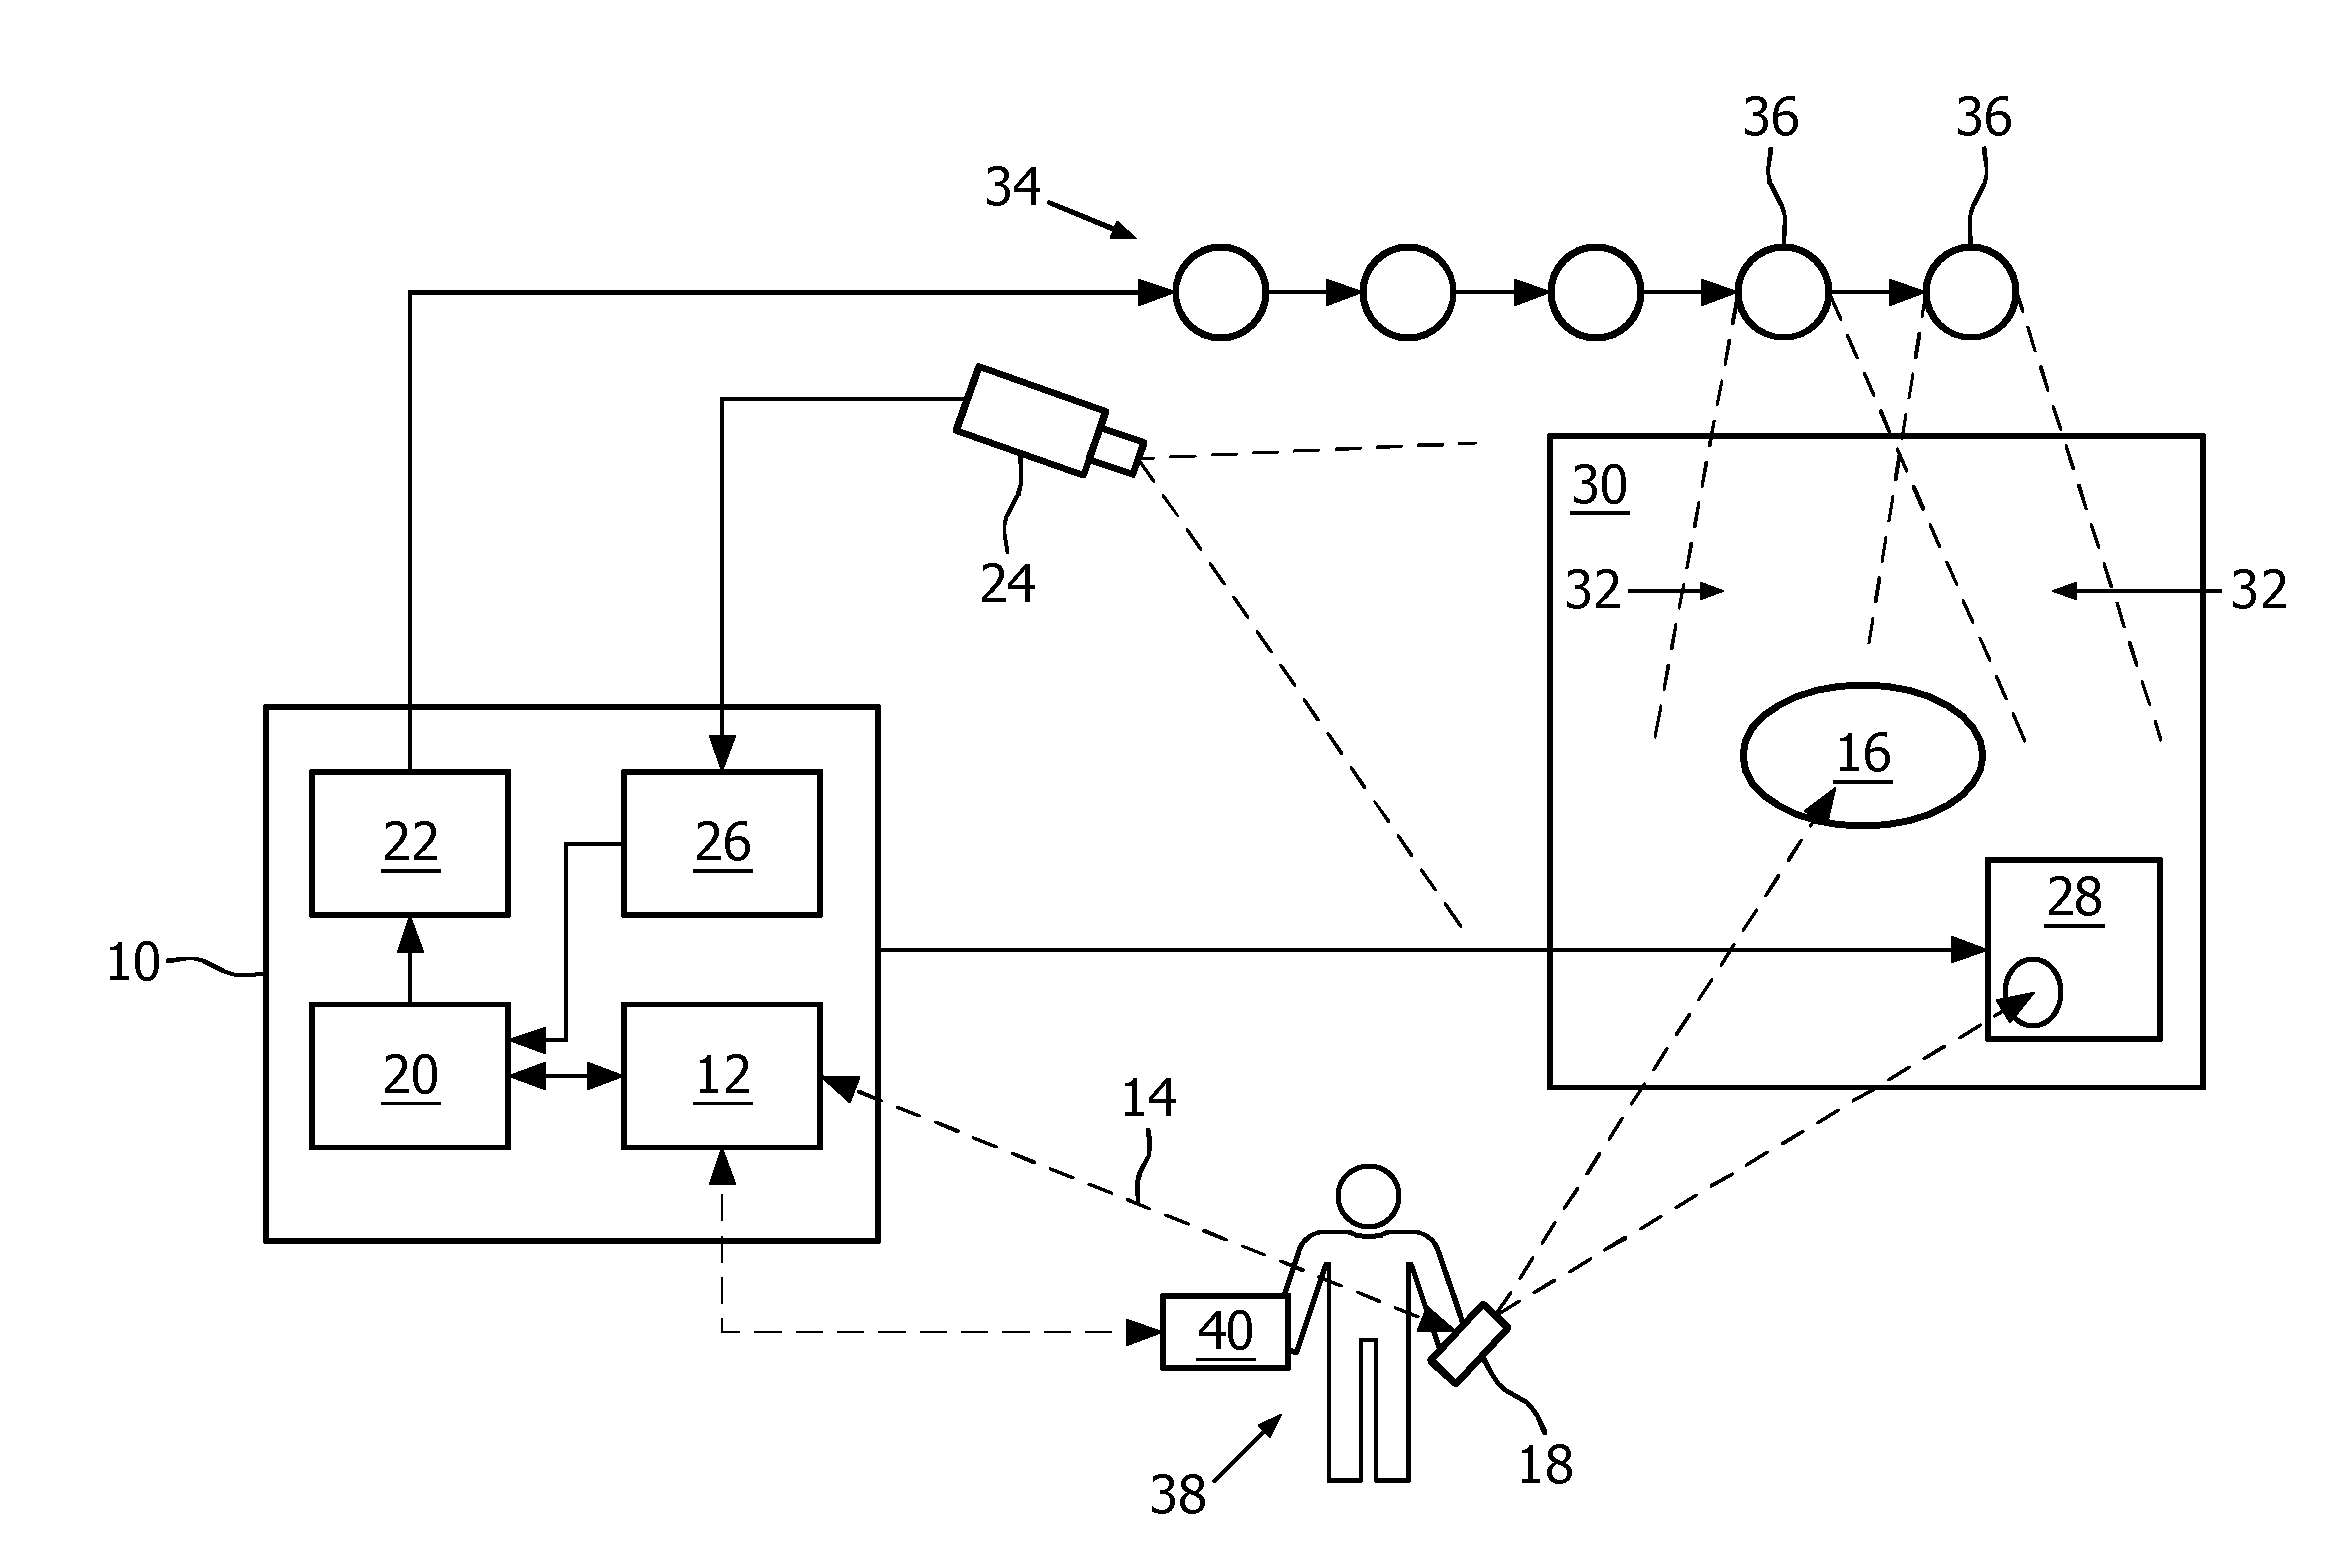 Interactive lighting control system and method